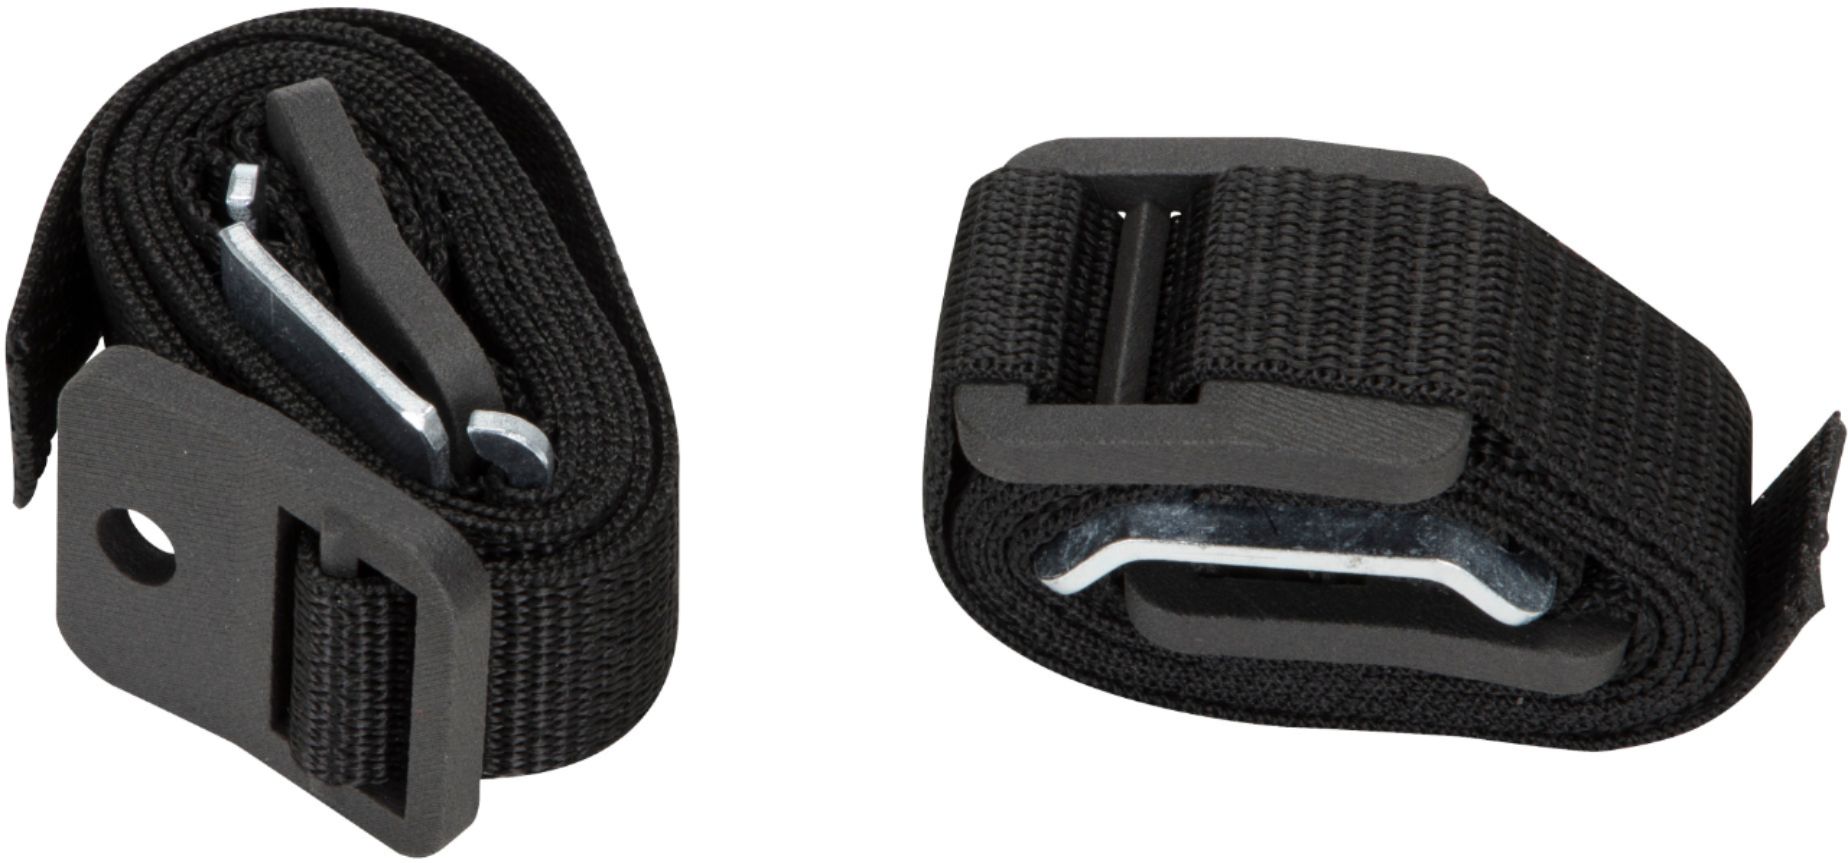 Secure SCSS-1 Convex Seat Support with Safety Straps